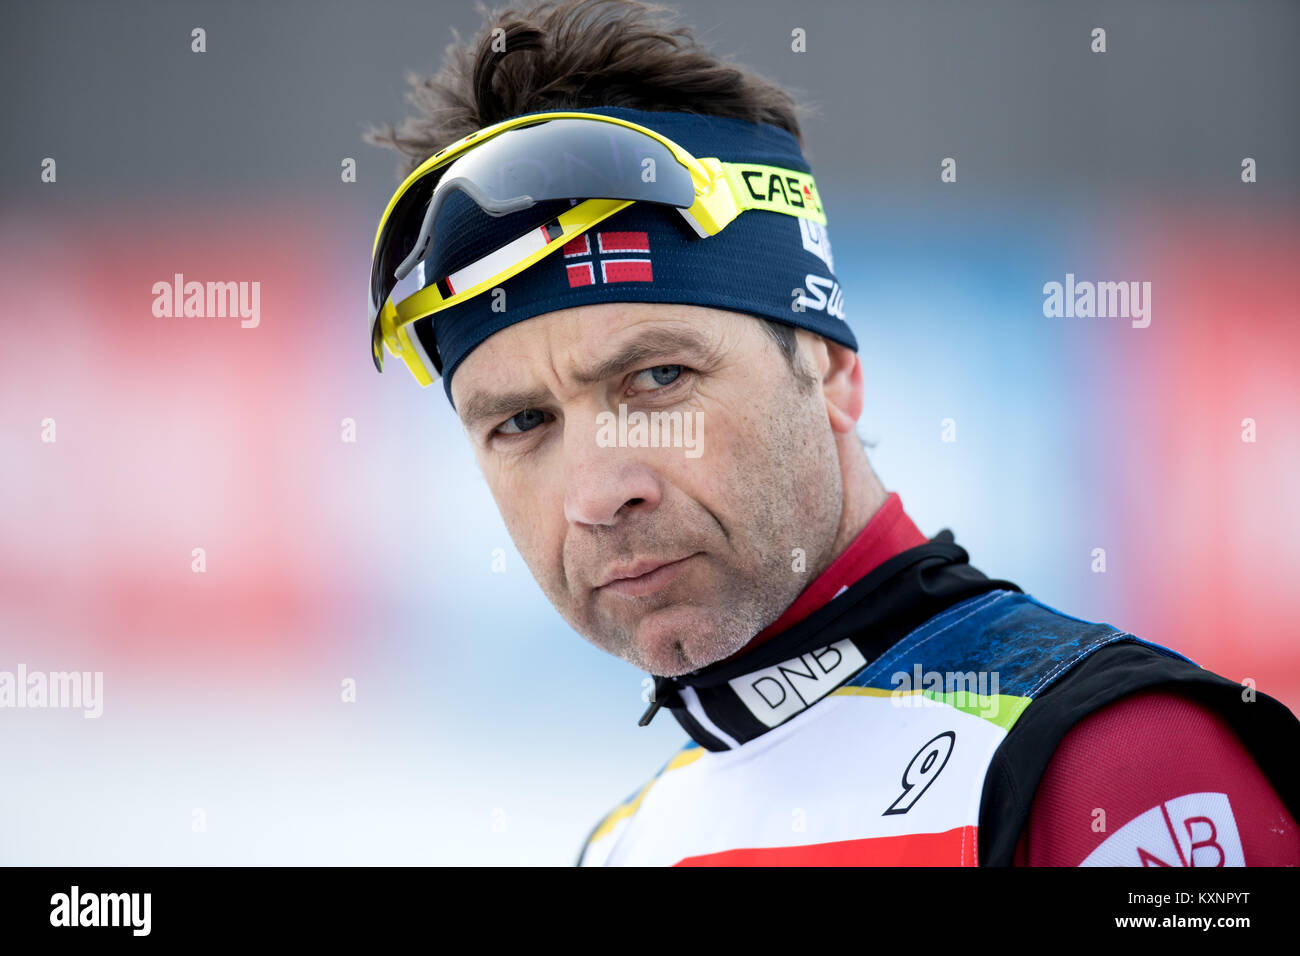 Ruhpolding, Germany. 11th Jan, 2018. Norwegian biathlete Ole Einar Bjoerndalen during a training session at the Chiemgau Arena in Ruhpolding, Germany, 11 January 2018. Credit: Sven Hoppe/dpa/Alamy Live News Stock Photo